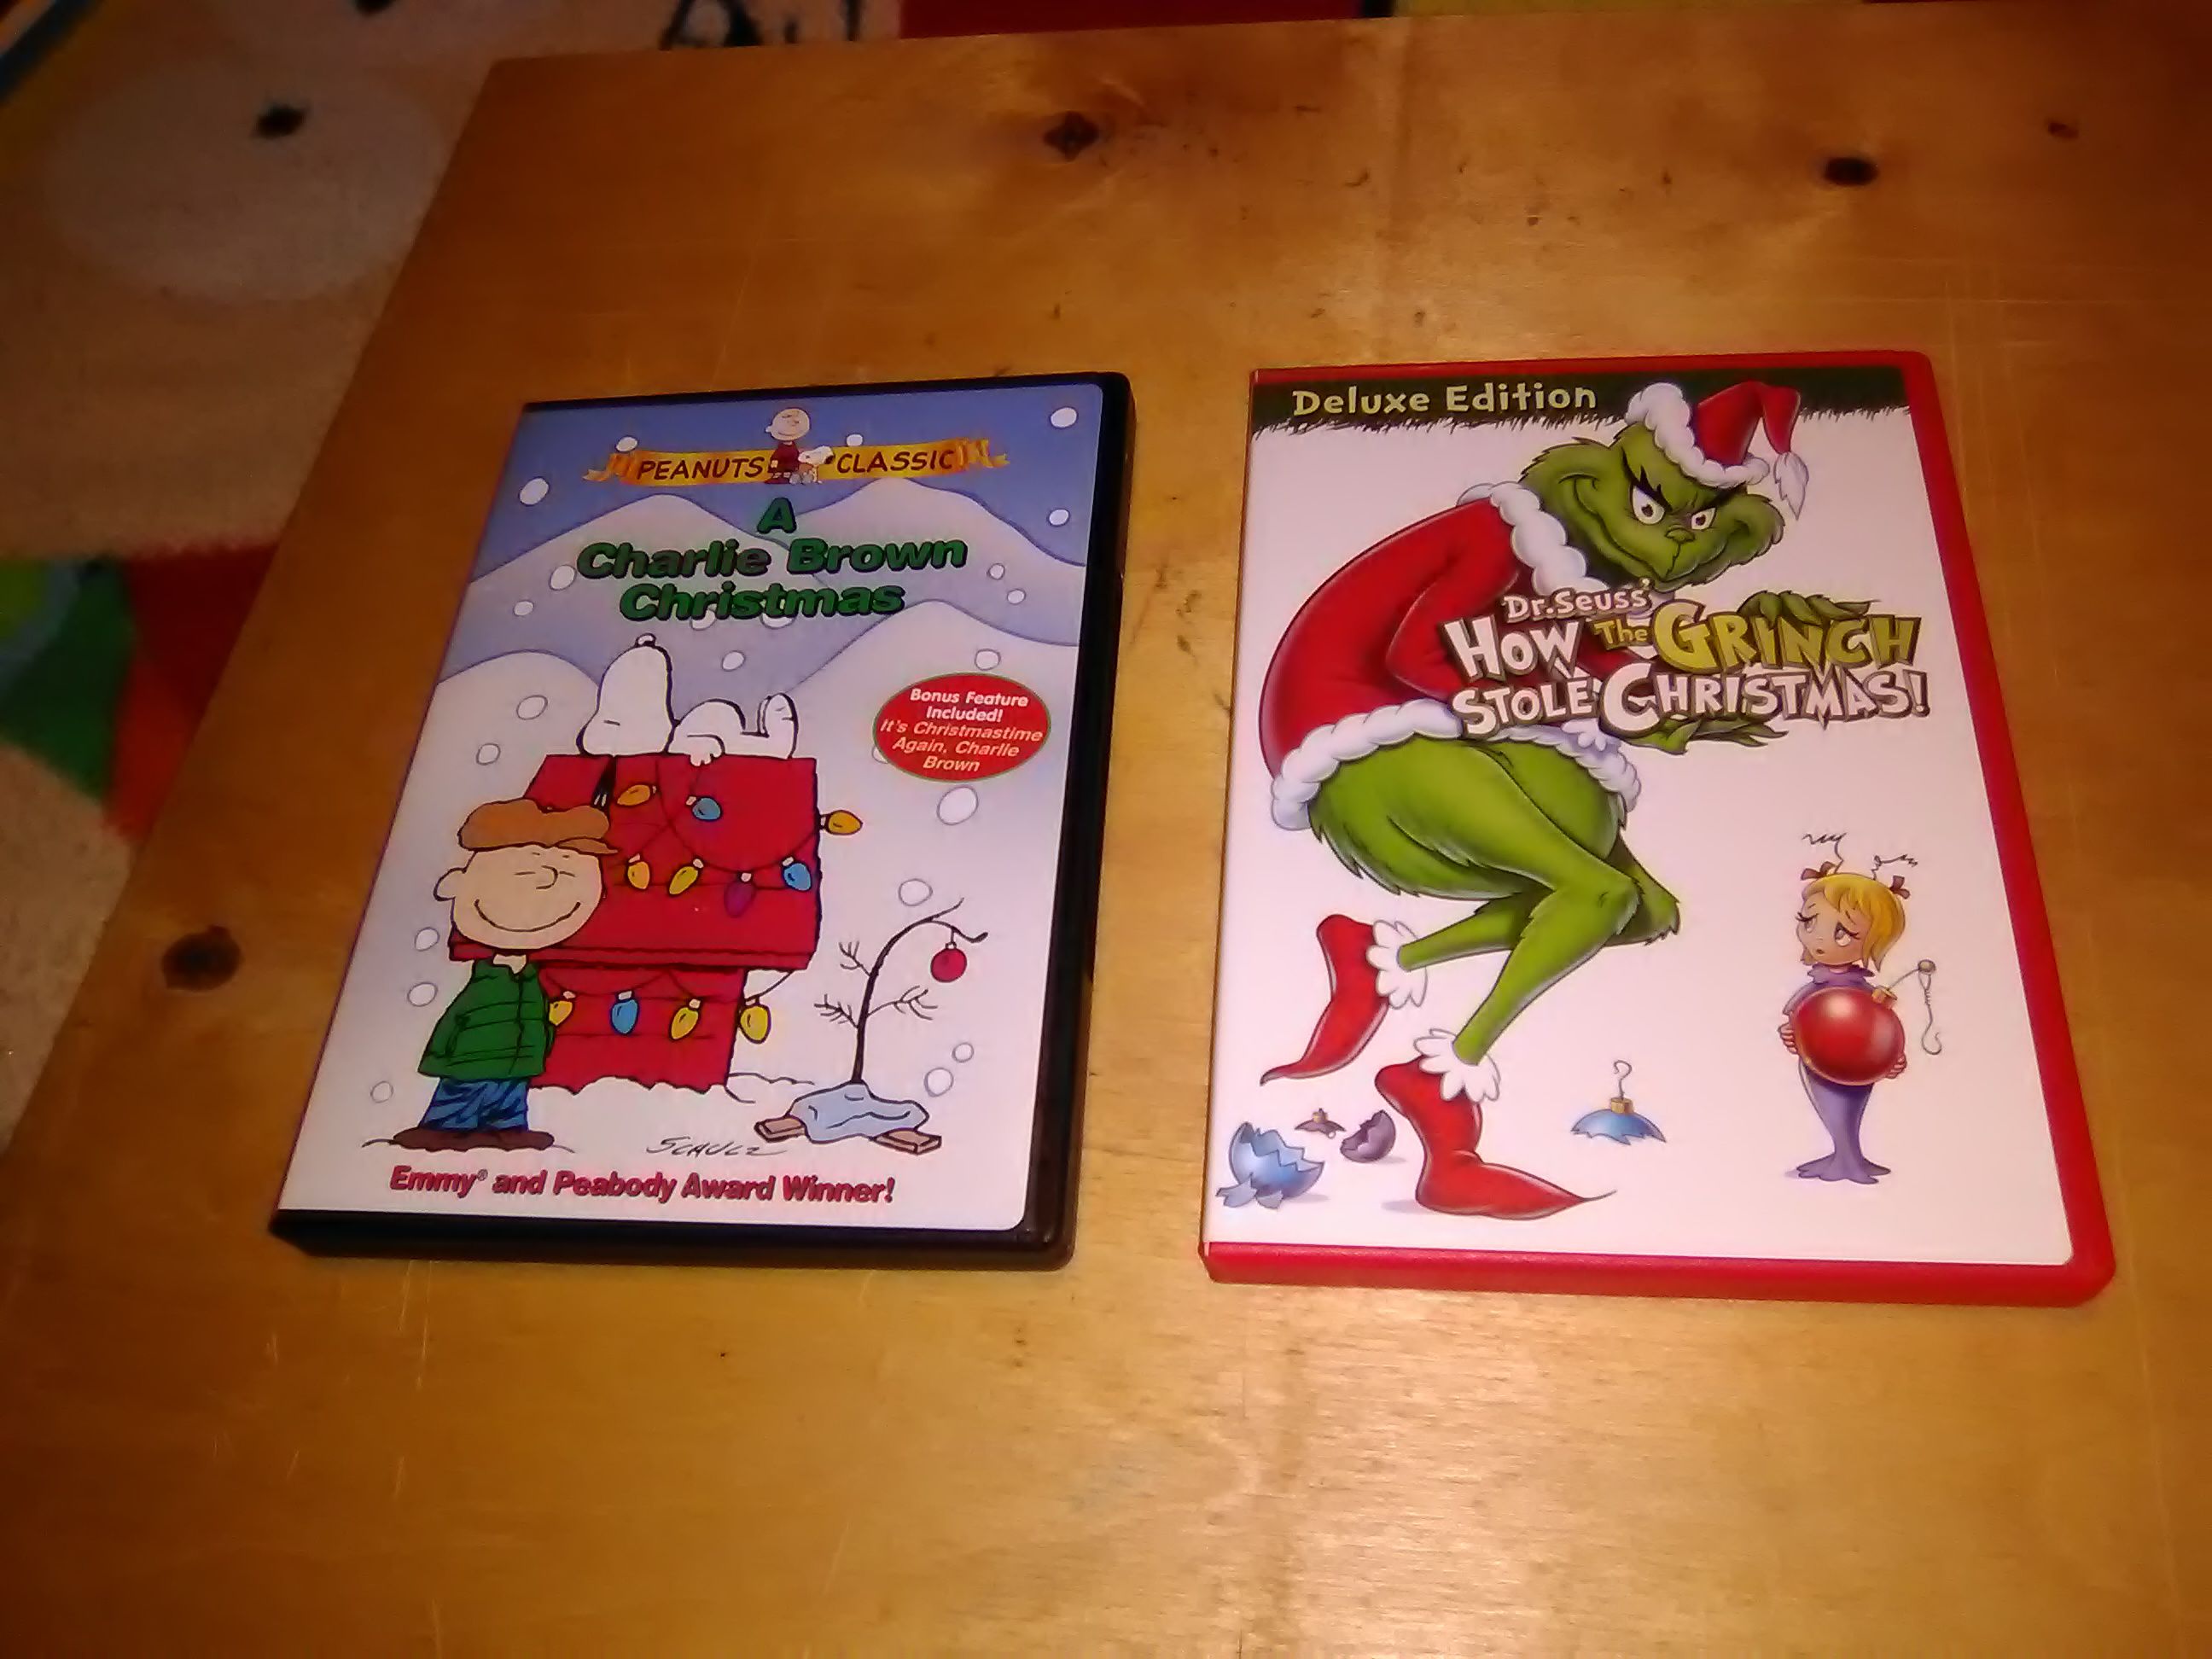 The Grinch in Charlie Brown Christmas specials DVD